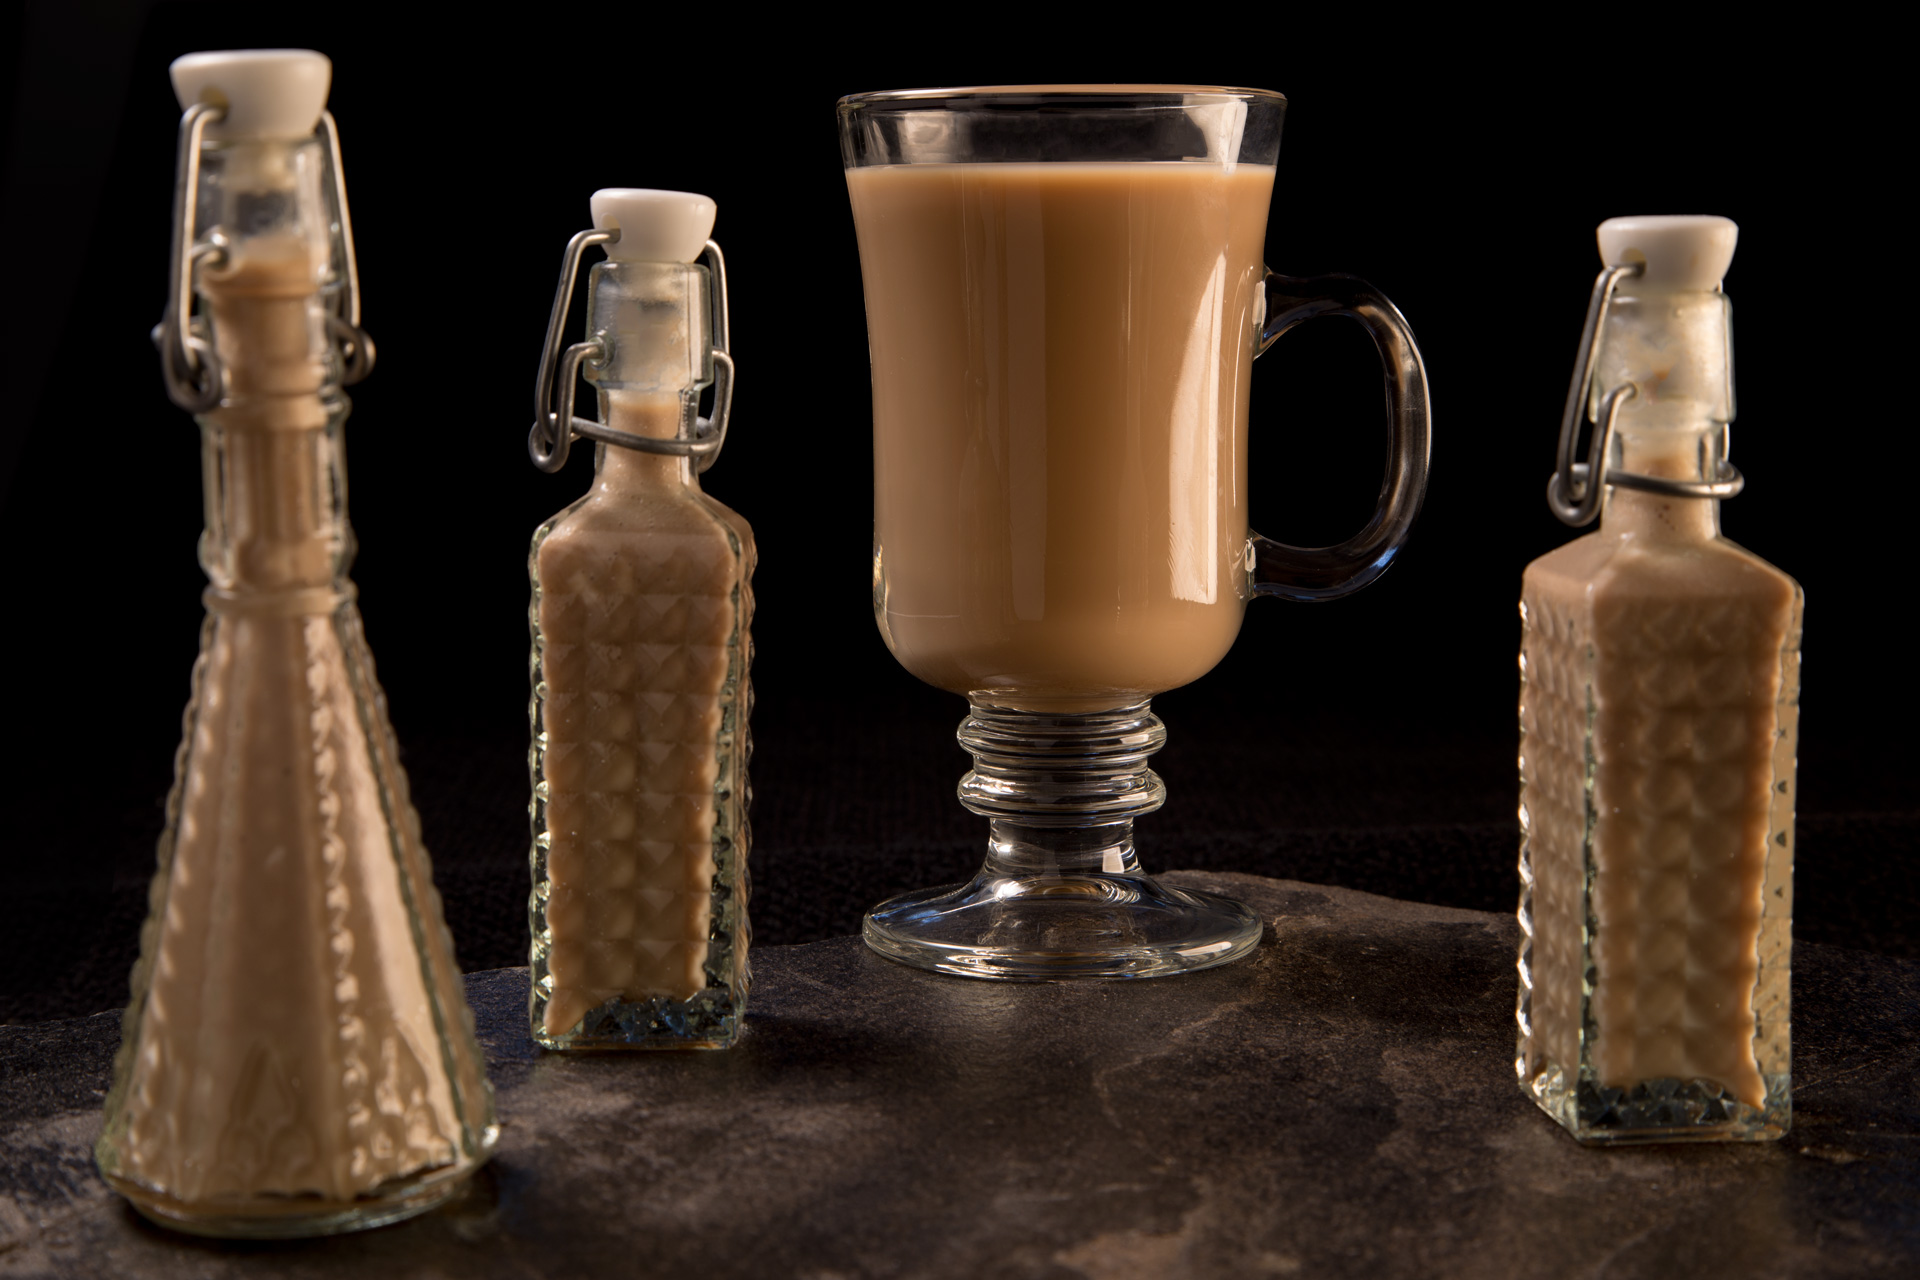 Don't buy storebought this holiday, treat yourself and your friends to a homemade Irish Cream liqueur. It's perfect for coffee, on the rocks or topping a decadent Irish dessert.